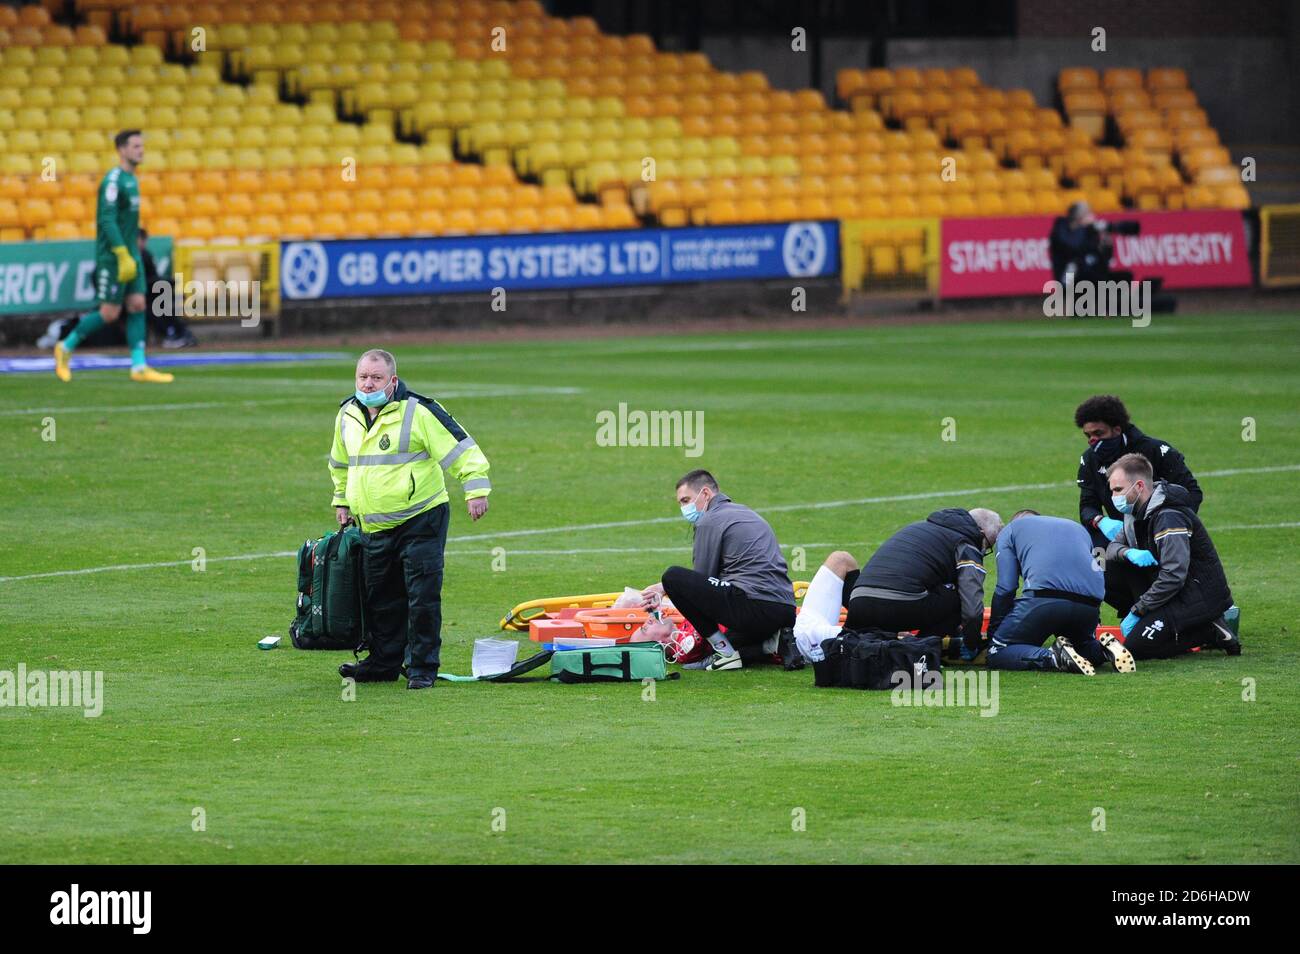 Salford???s Darron Gibson lies injured during the Sky Bet League Two match at Vale Park, Stoke-on-Trent. Stock Photo